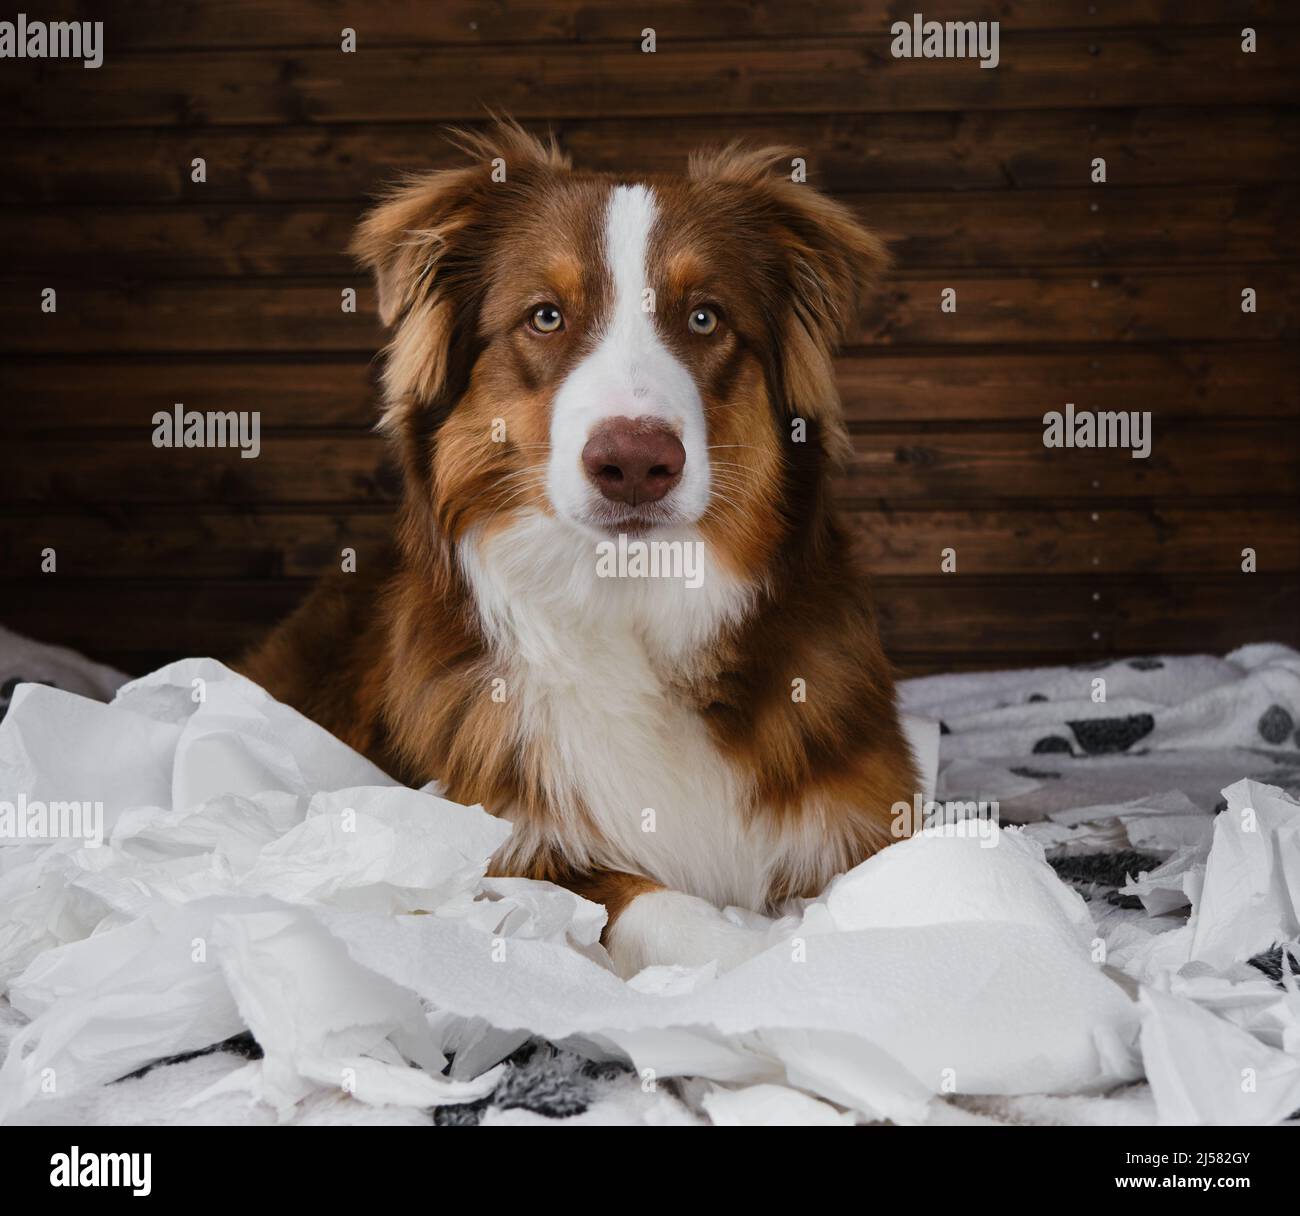 Aussie is young crazy dog making mess. Dog is alone at home entertaining himself by eating toilet paper. Charming brown Australian Shepherd puppy is p Stock Photo